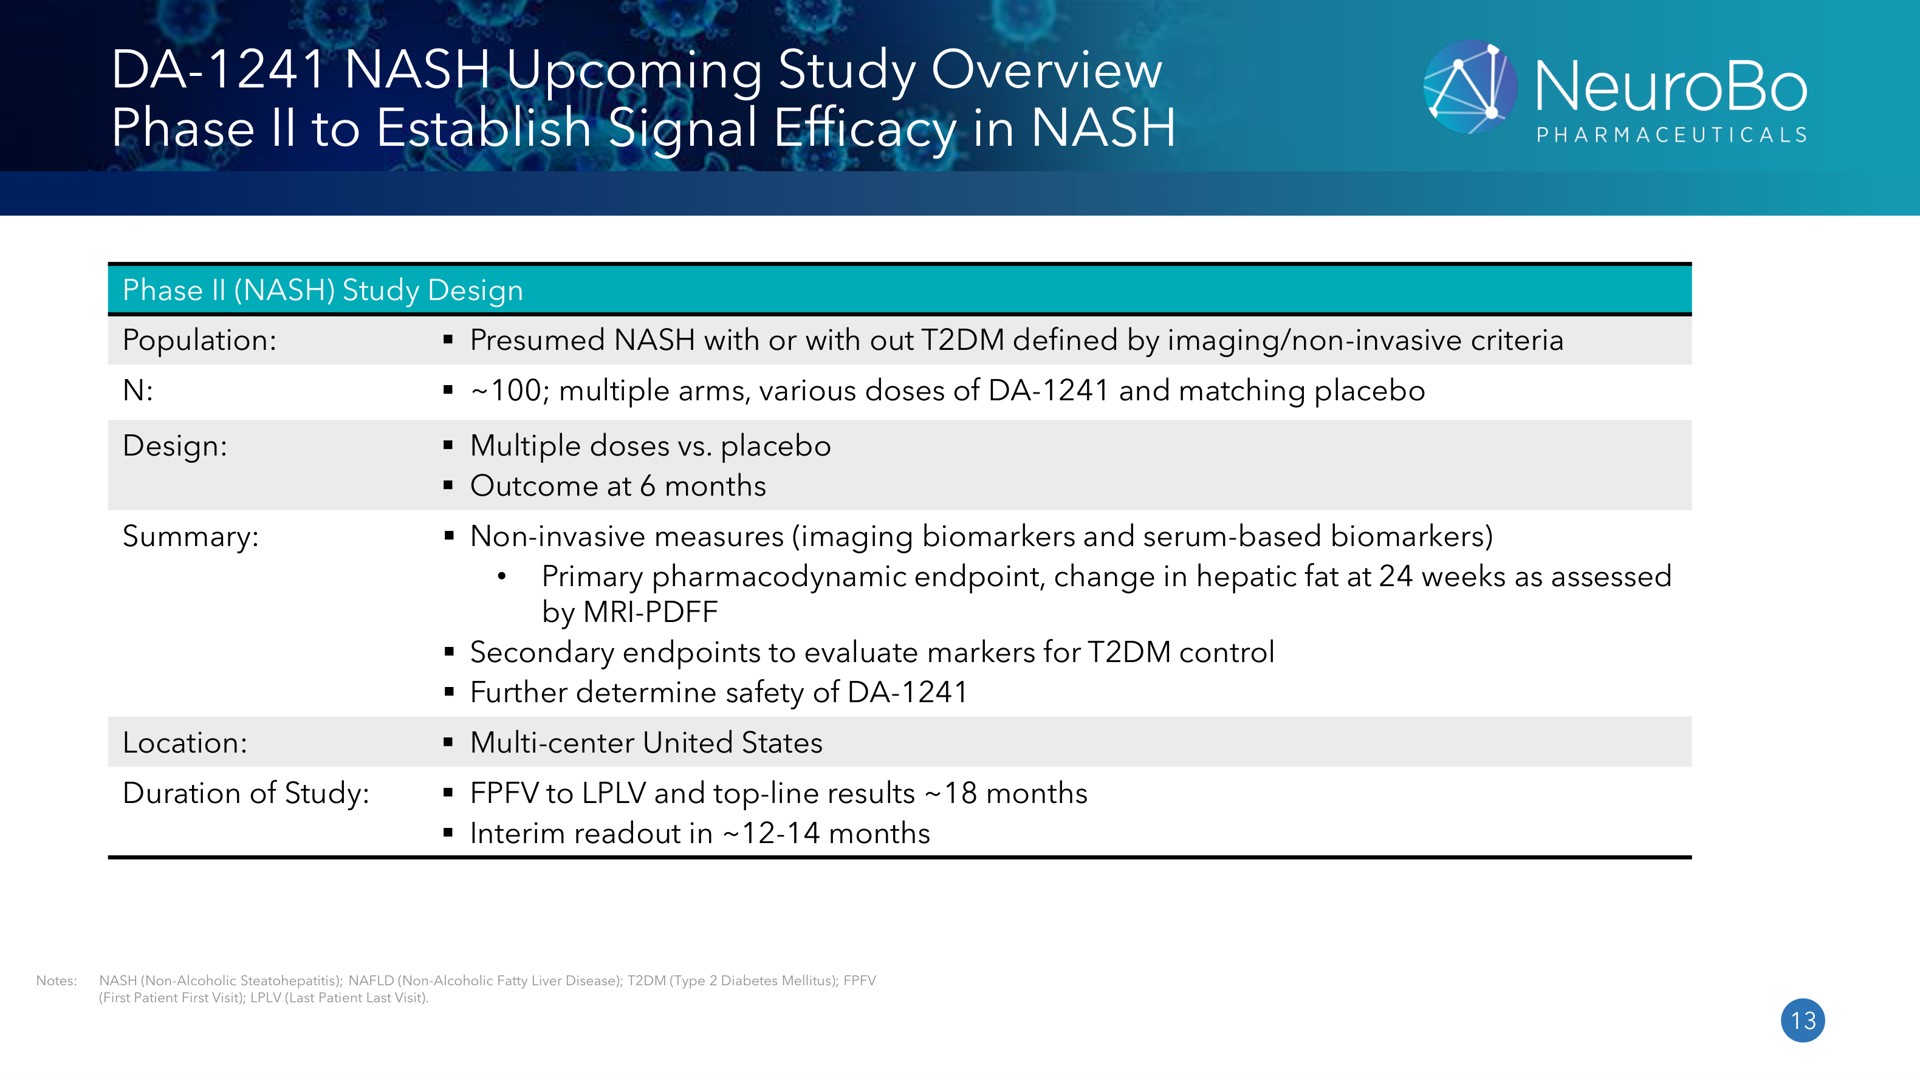 nash upcoming study overview phase to establish signal efficacy in nash a | NeuroBo Pharmaceuticals